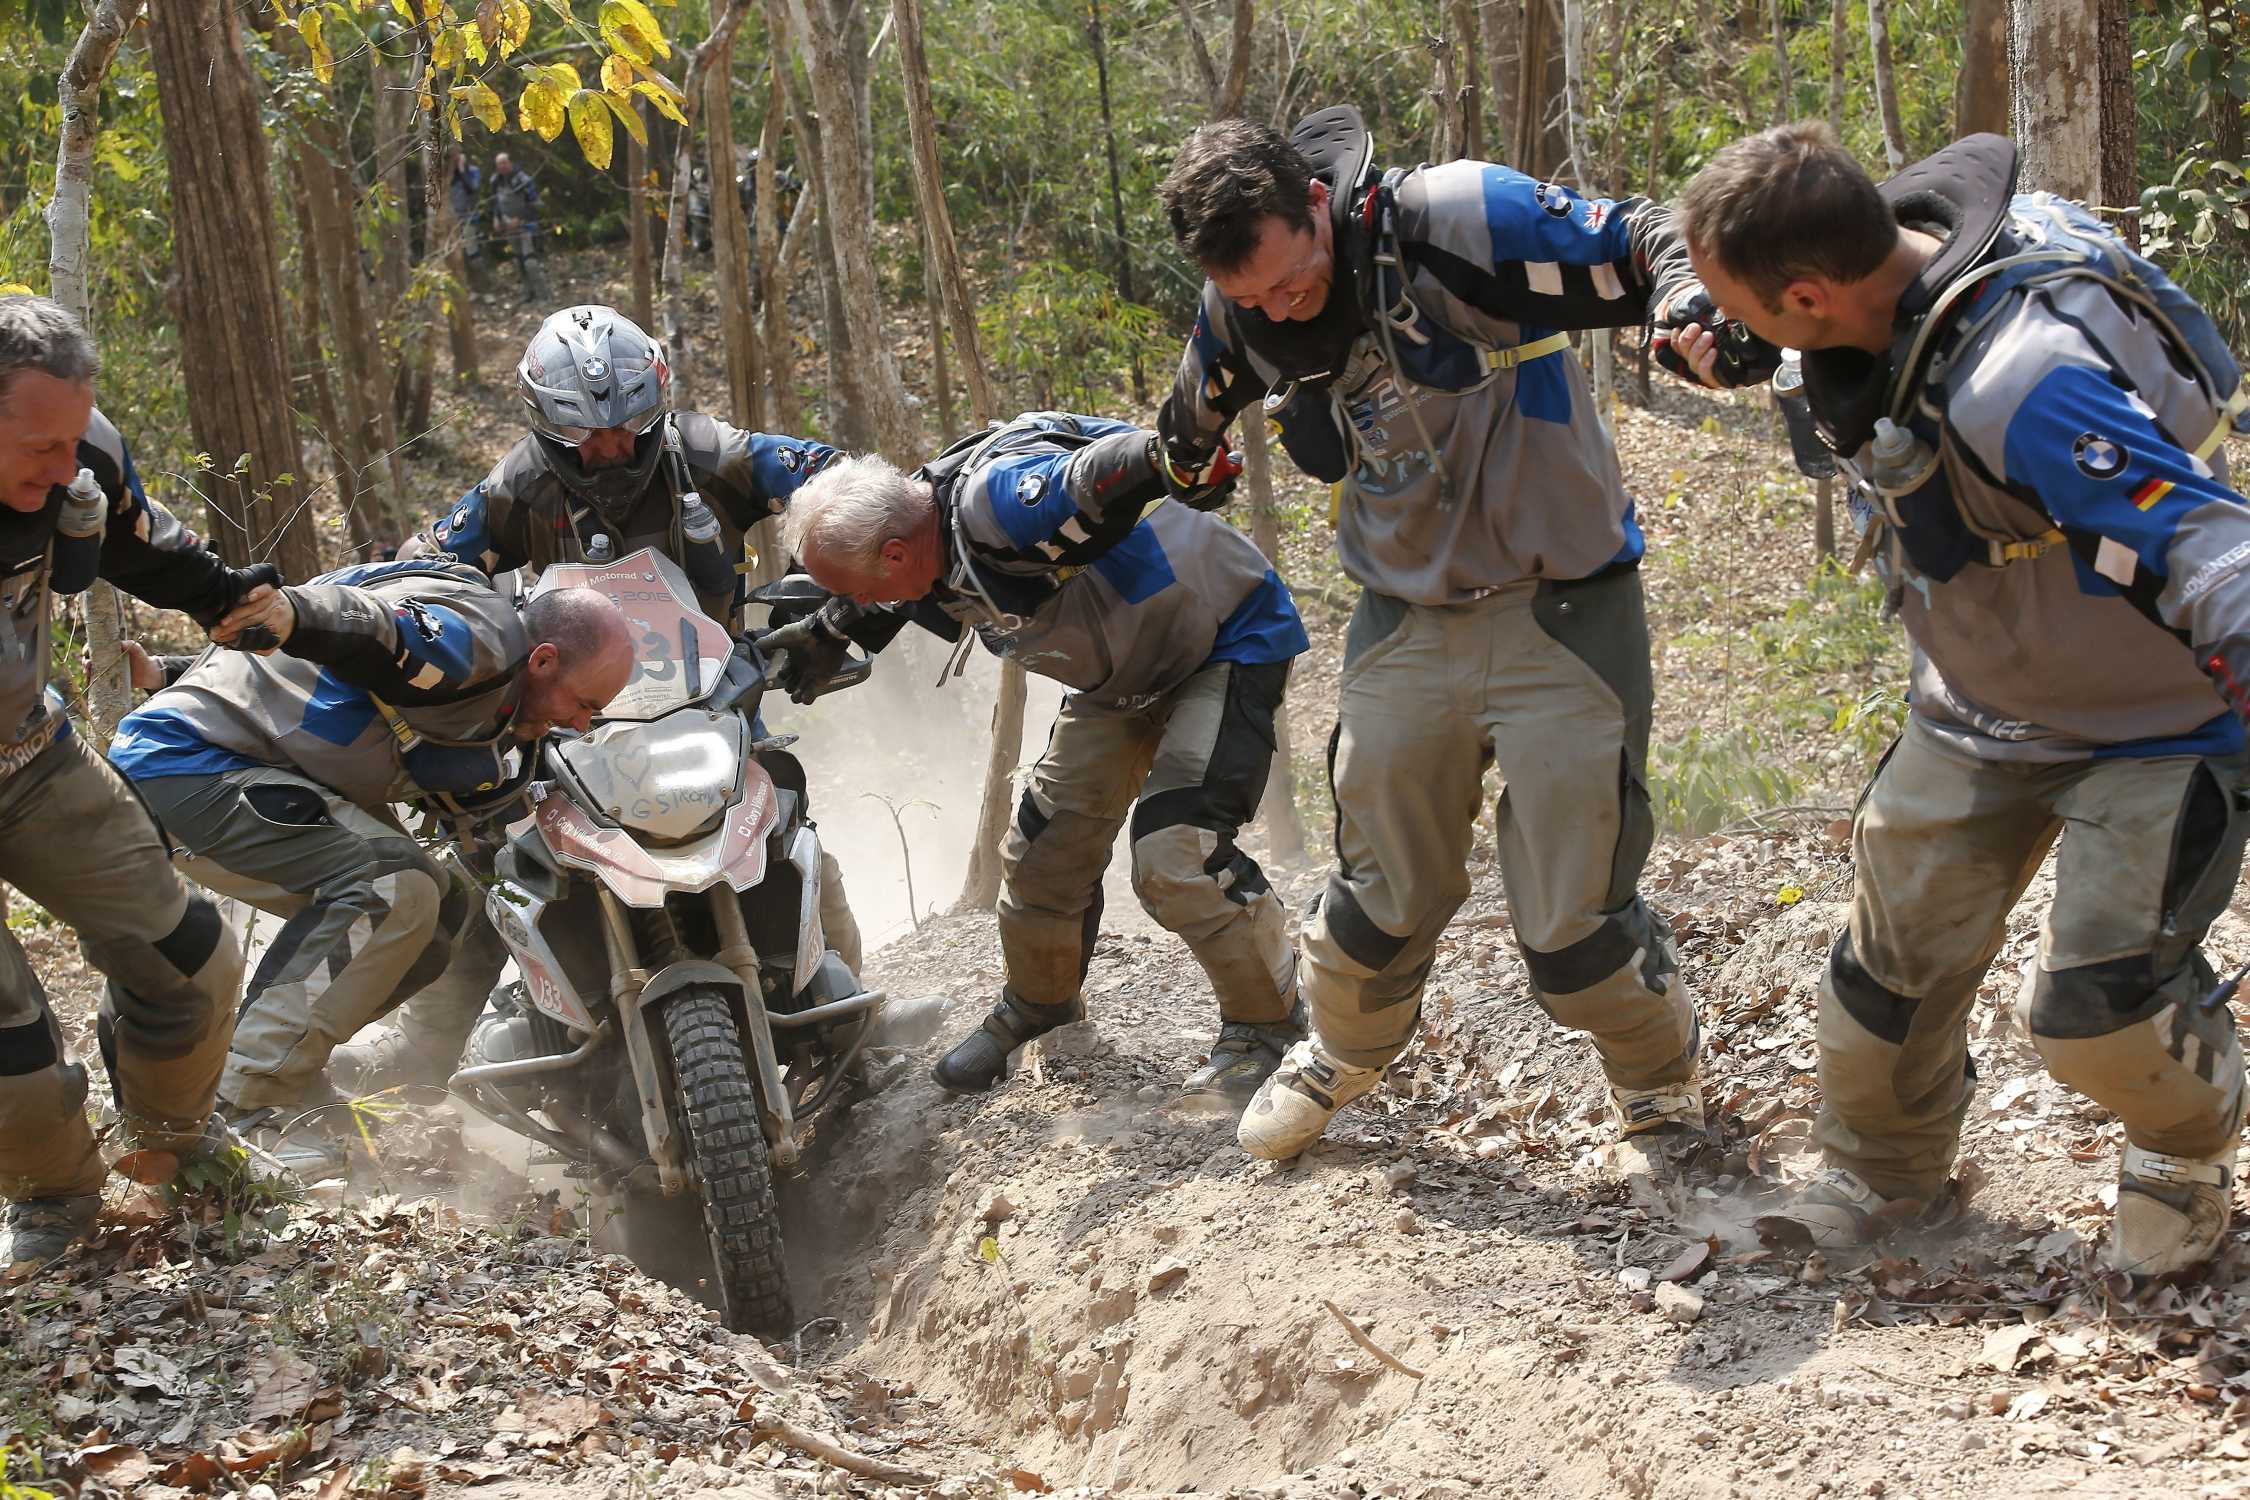 Bmw Motorrad International Gs Trophy Southeast Asia 16 Day 6 Toughest Day Yet Brings The Biggest Smiles At Gstrophy 16